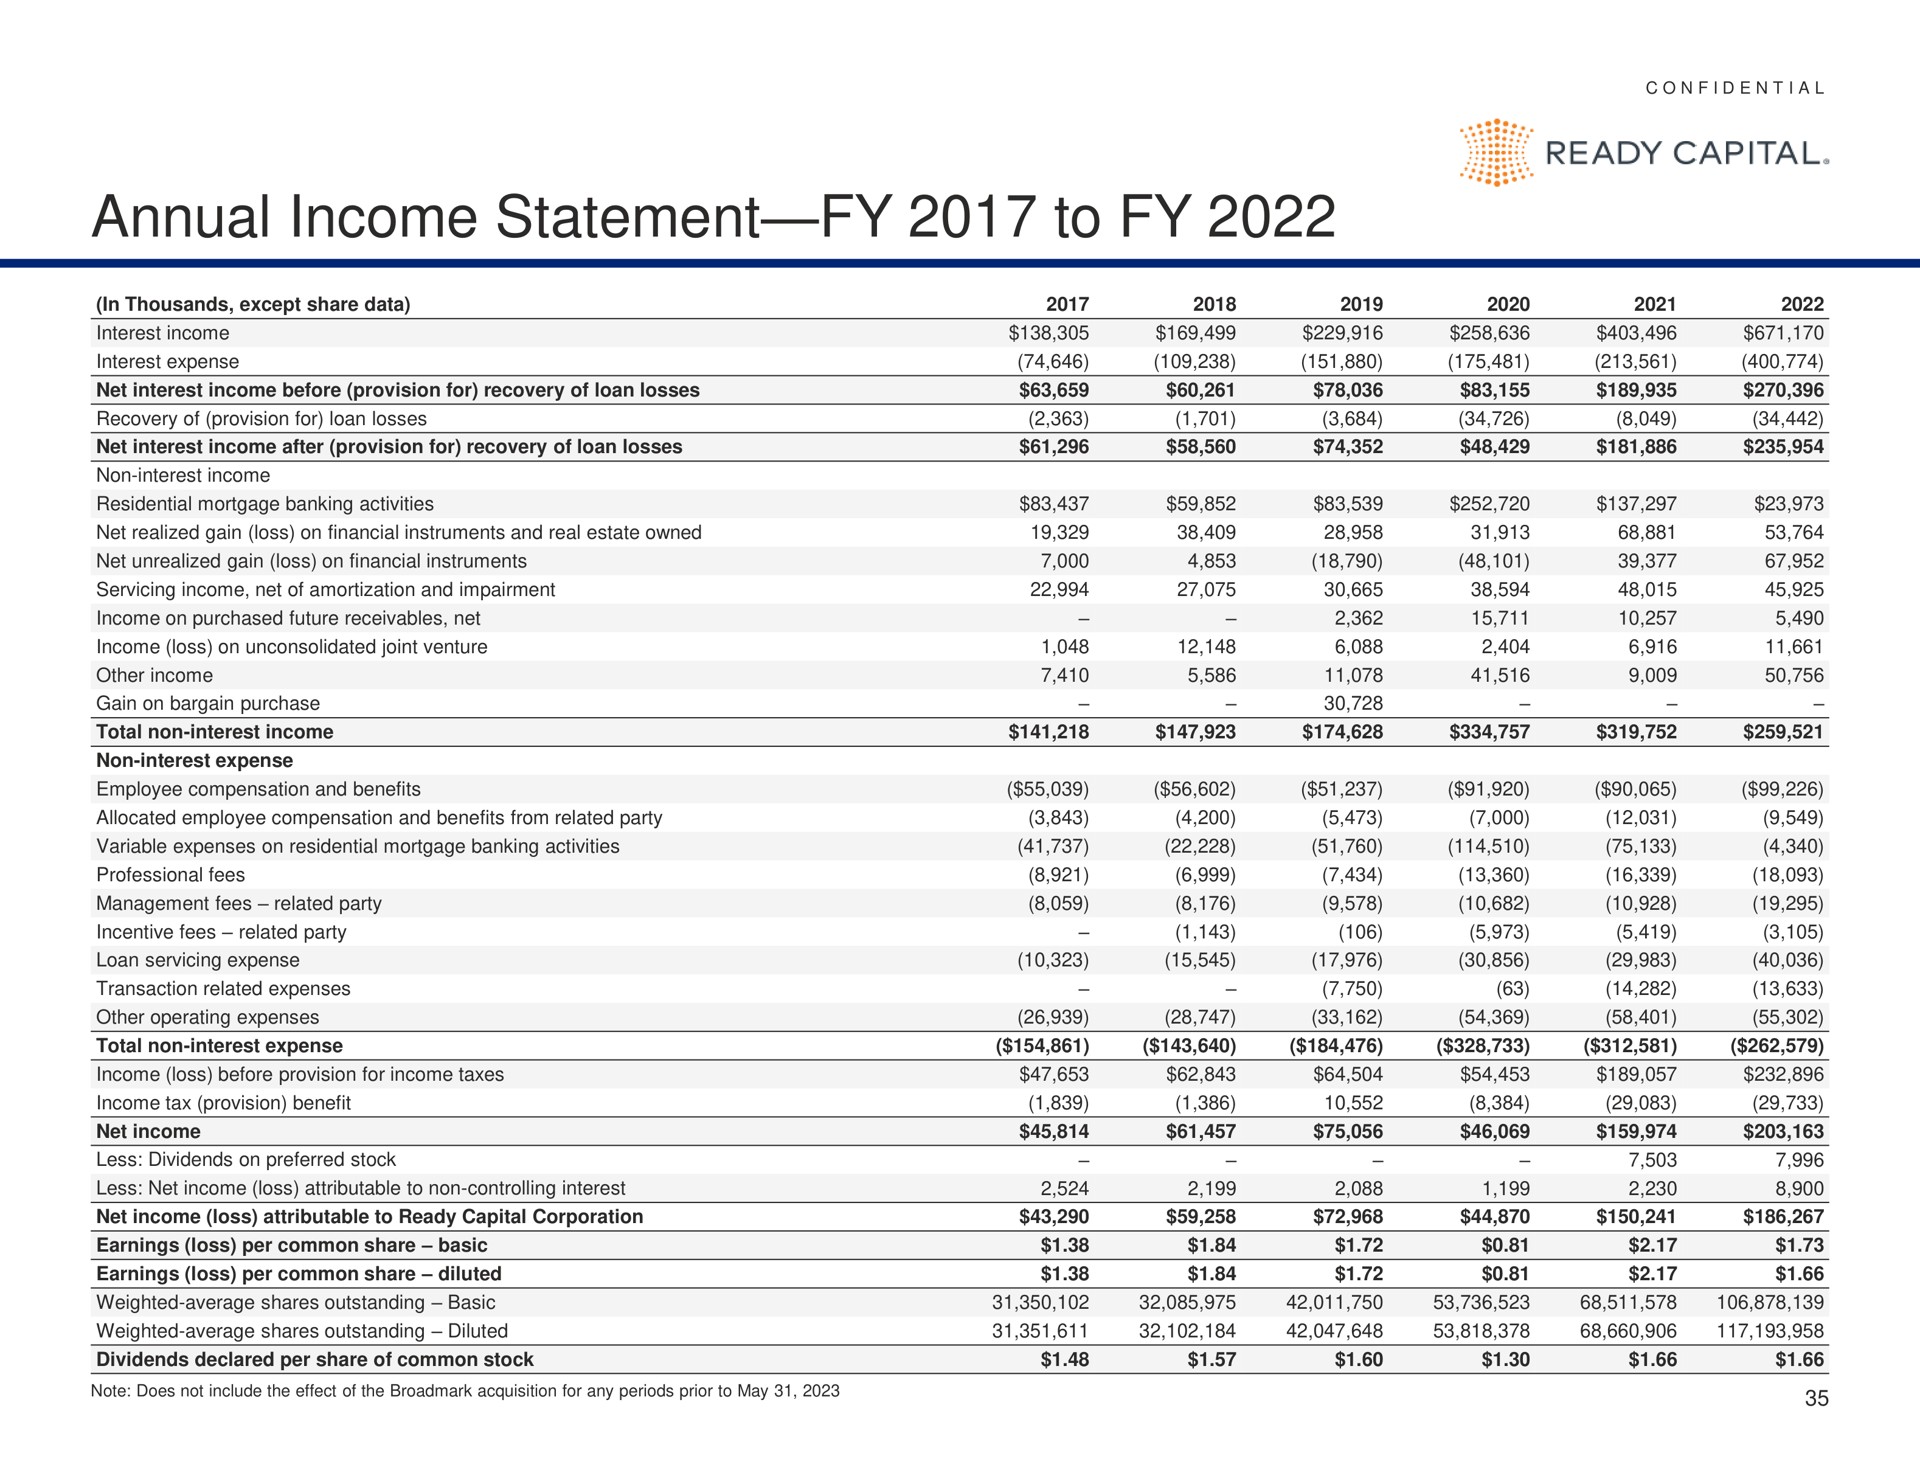 annual income statement to ready capital | Ready Capital